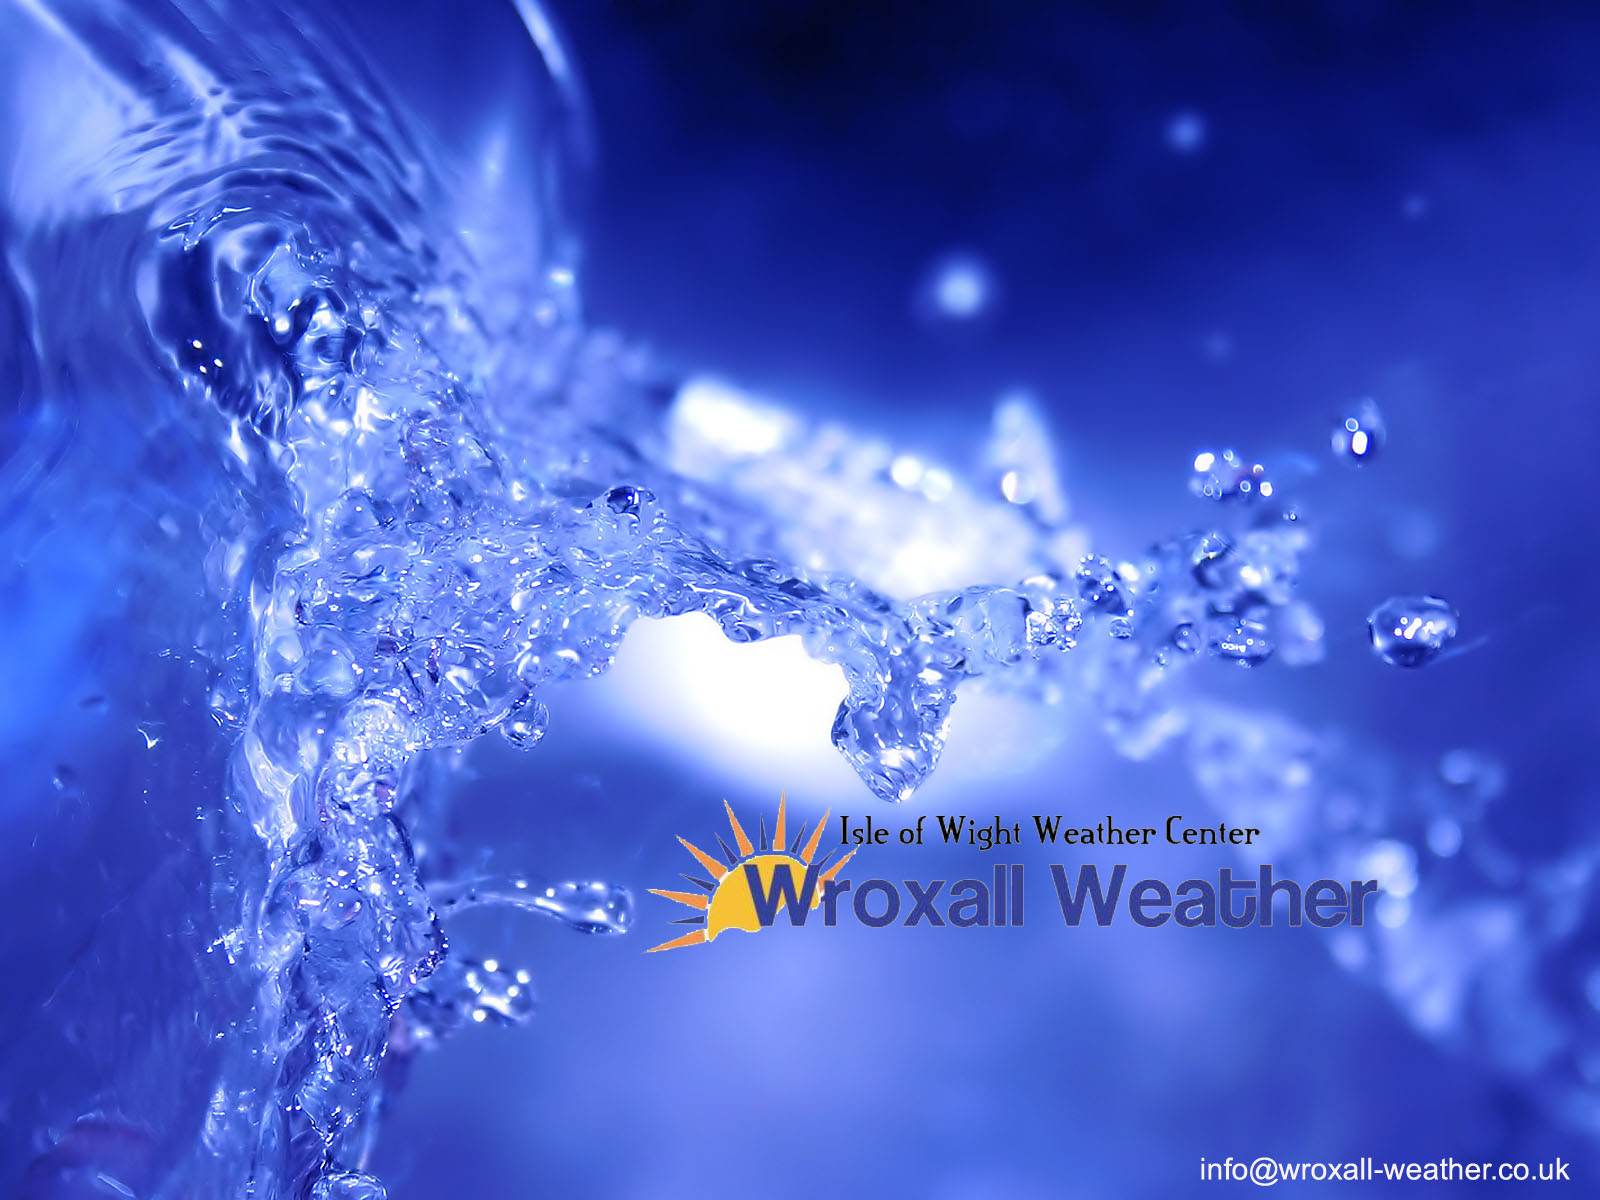 The New Wroxall Weather Wallpaper Click To Enlarge And Then Right